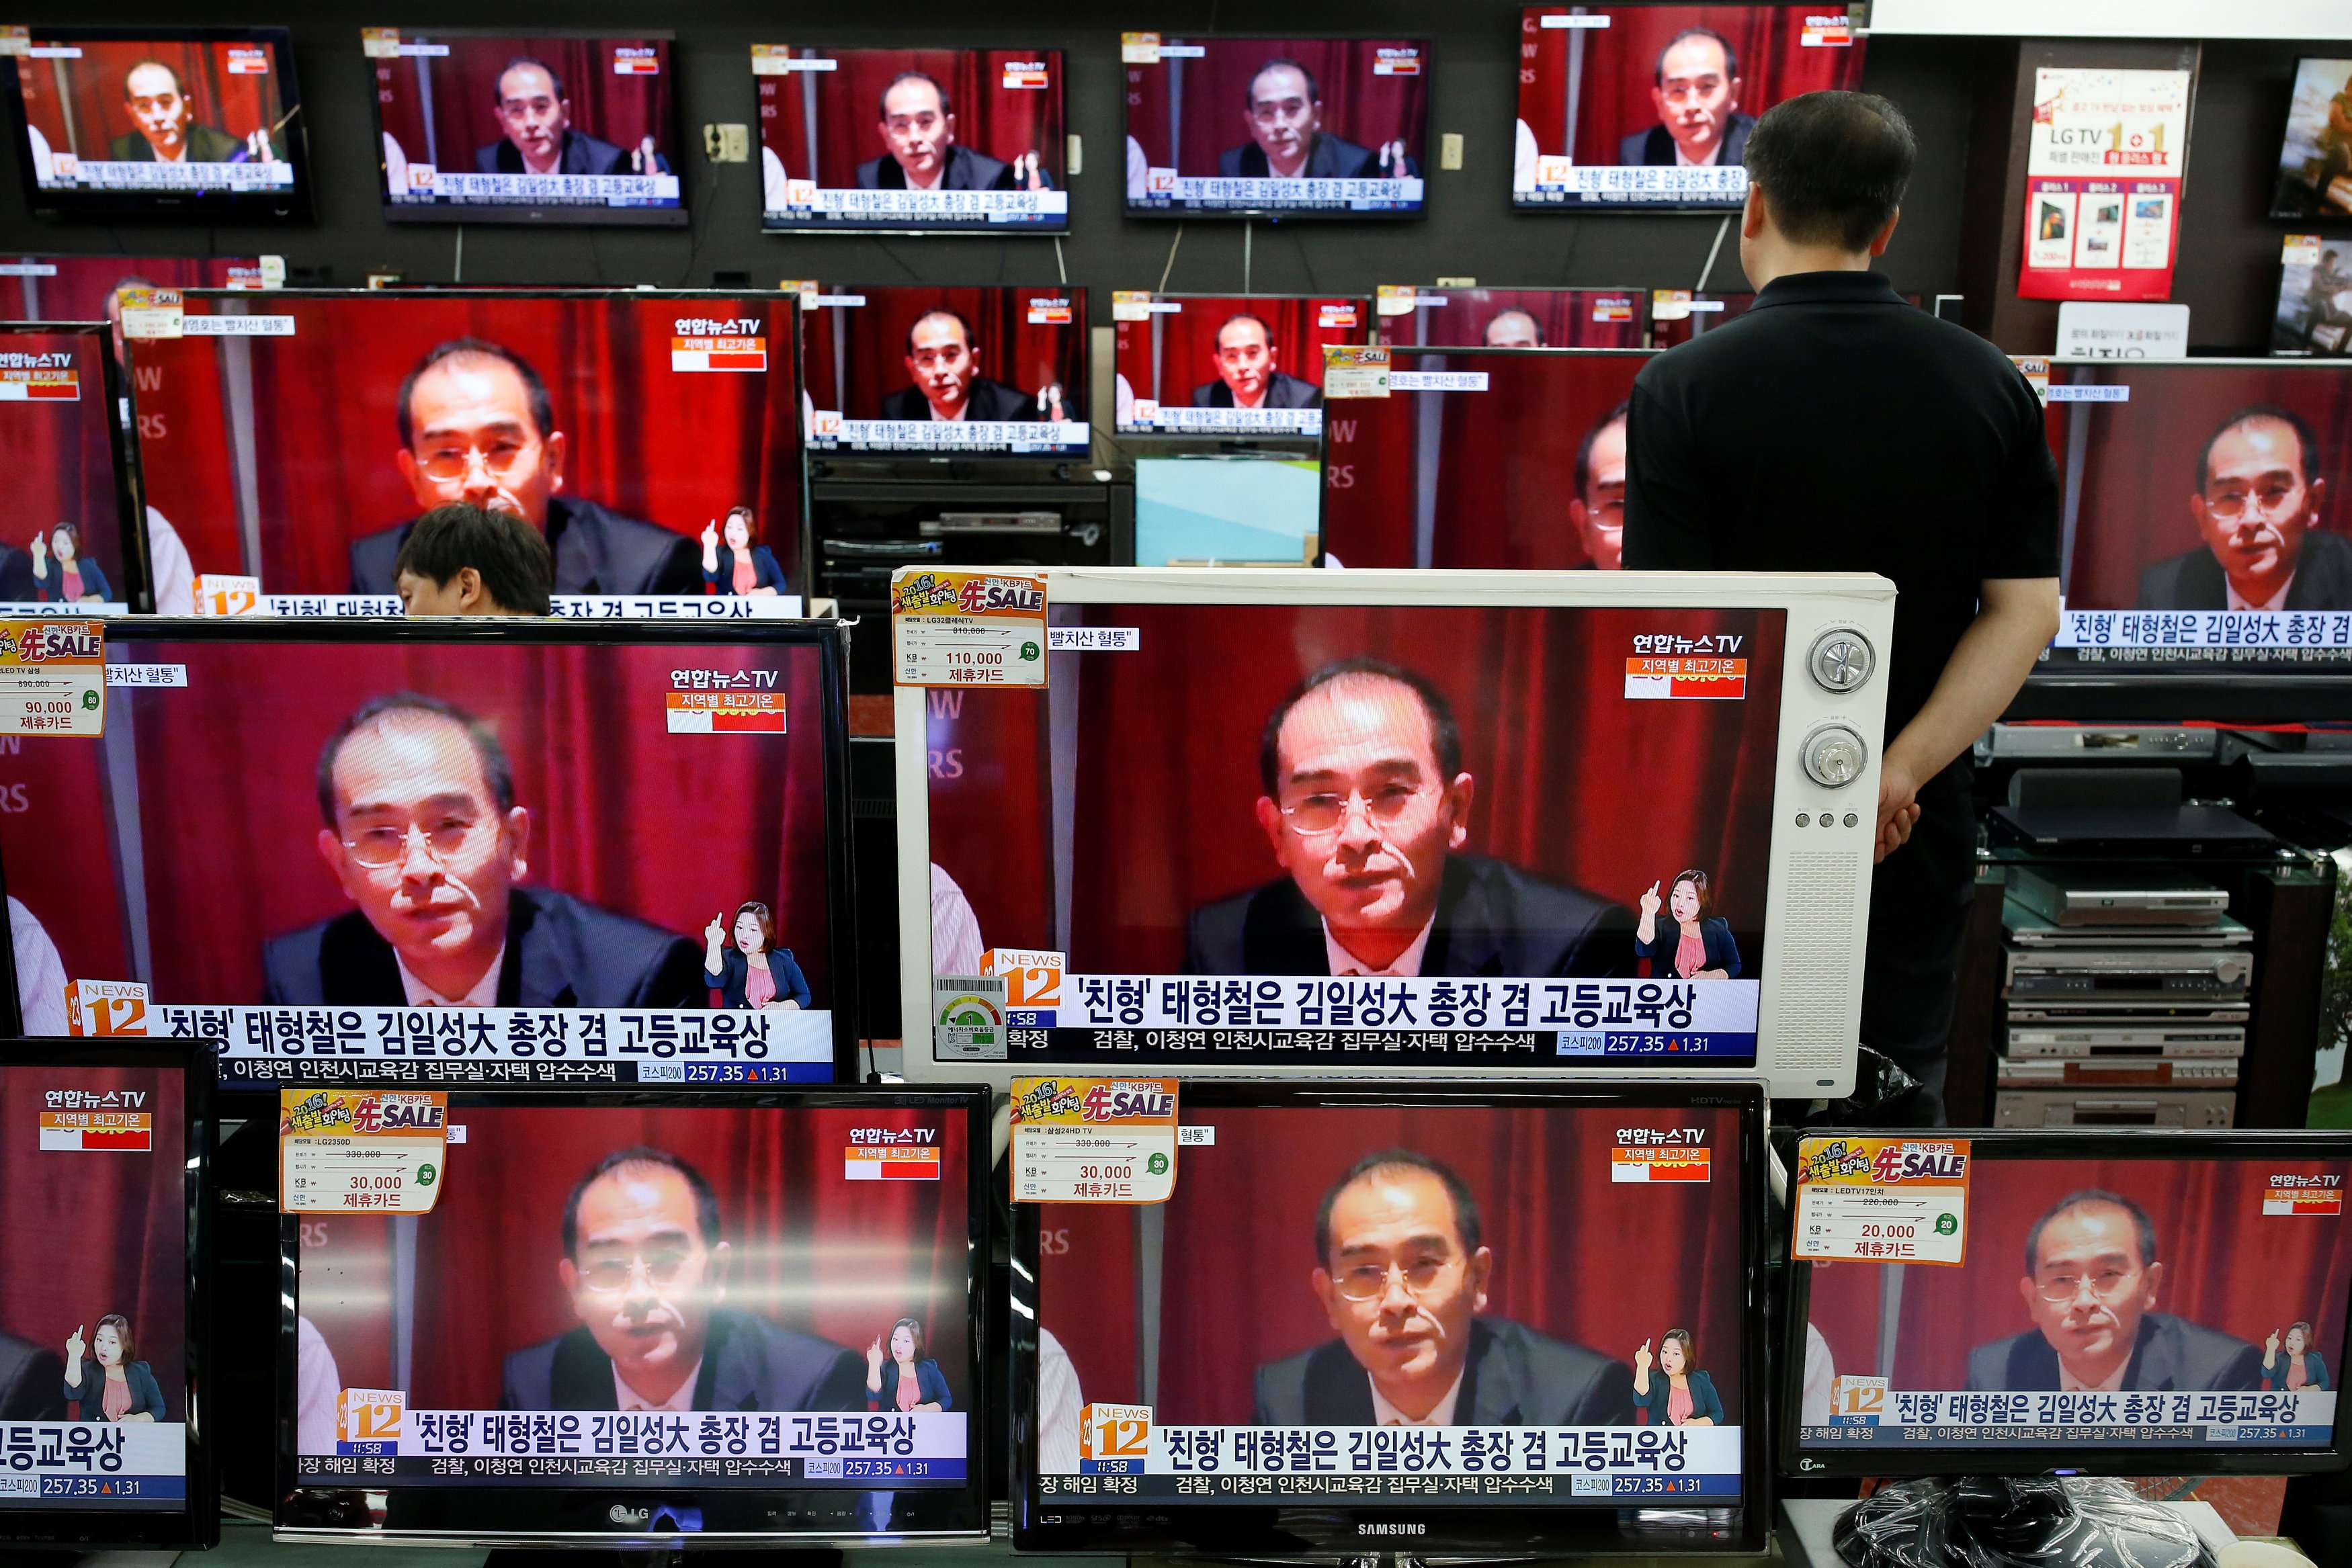 A sales assistant watches TV sets broadcasting a news report on Thae Yong Ho, North Korea's deputy ambassador in London, who has defected with his family to South Korea. Photo: Reuters